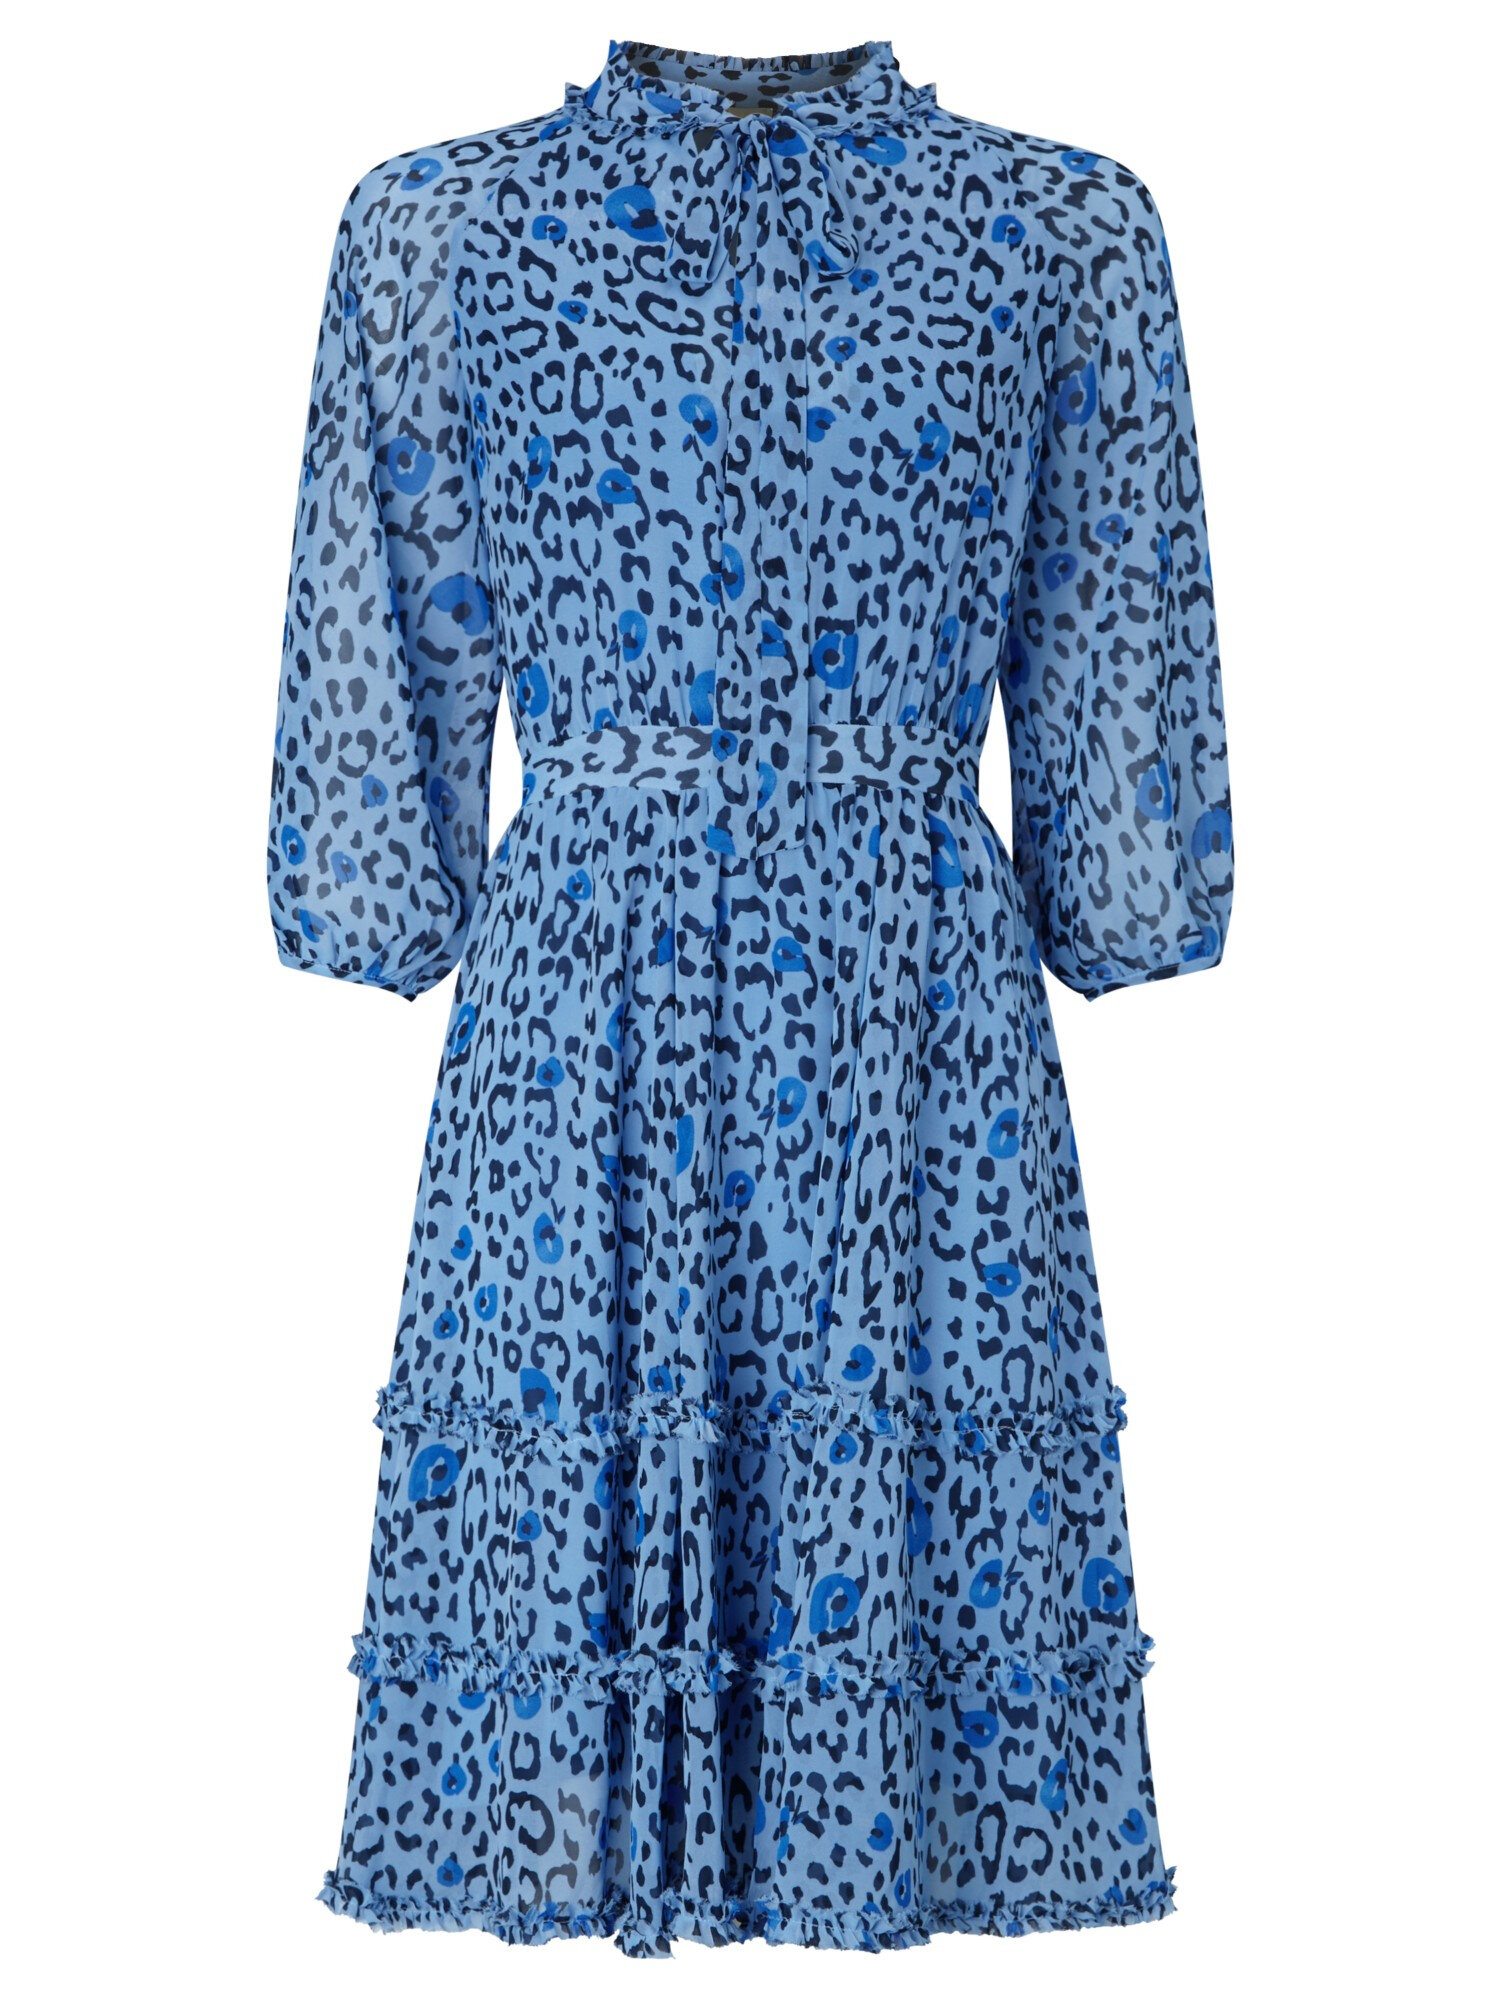 Somerset by Alice Temperley Leopard Print Dress — UFO No More